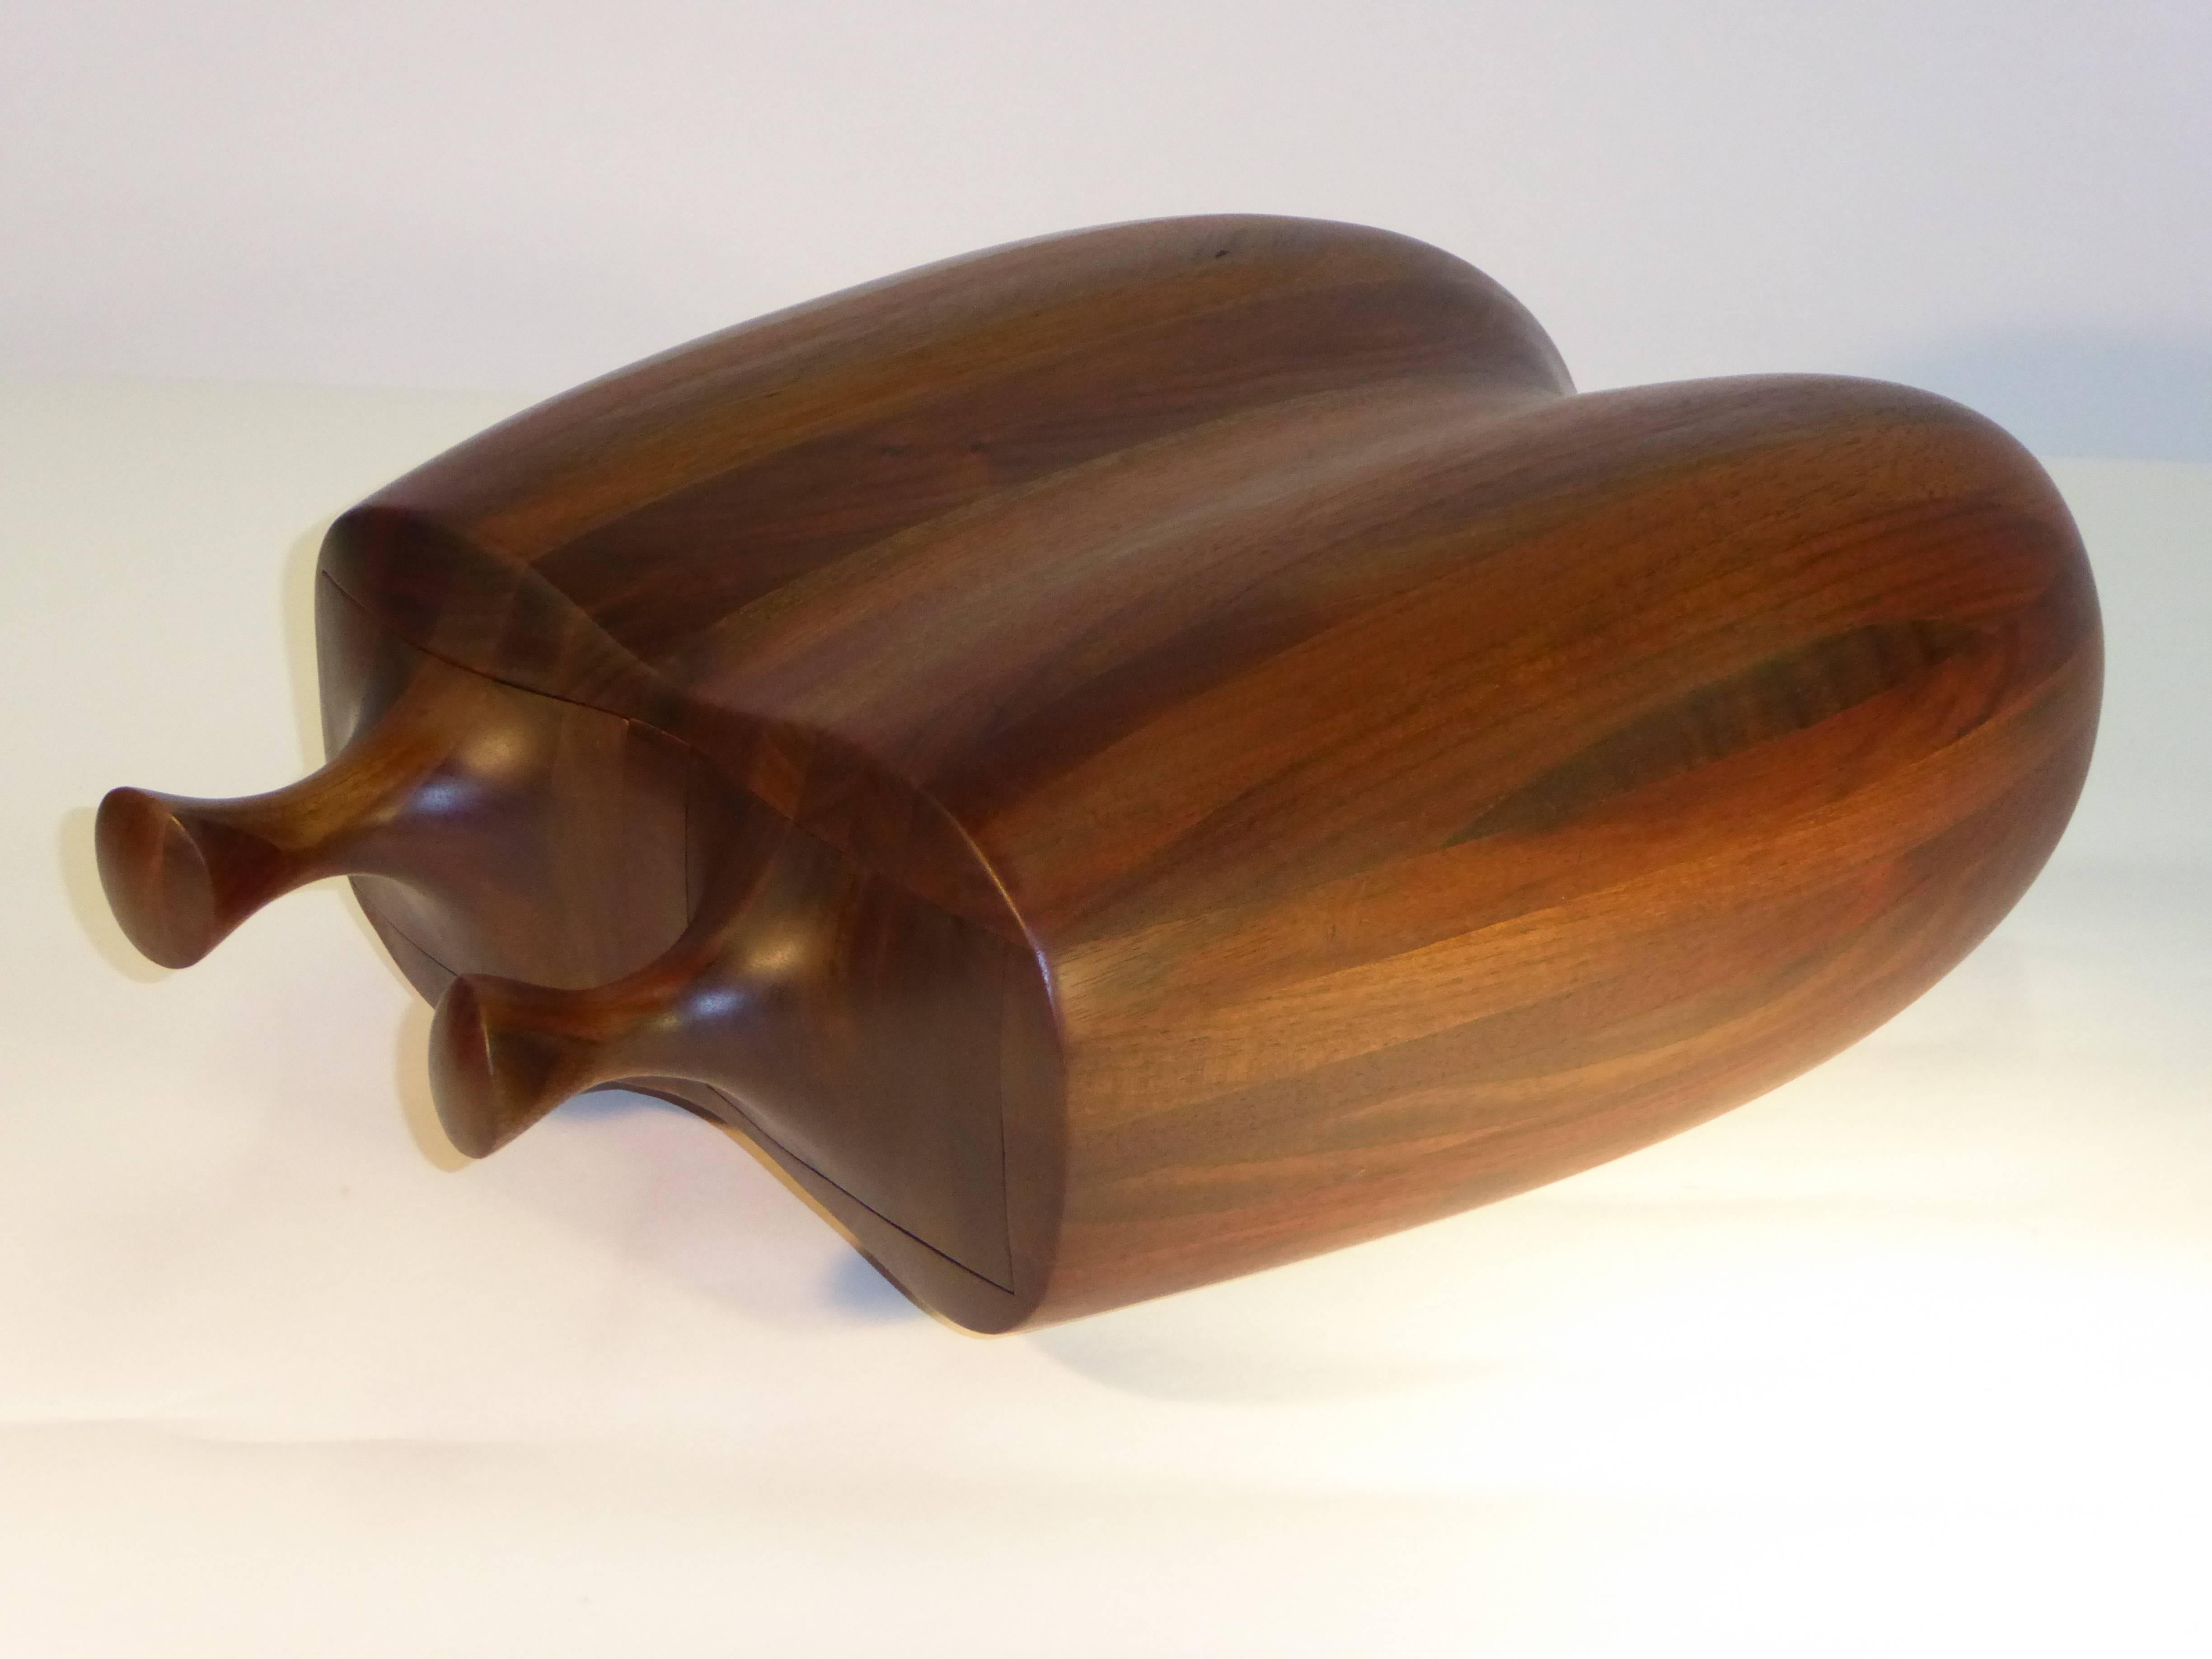 An extraordinary and large Daniel Loomis Valenza designed sinuous organic solid laminated and sculpted walnut tabletop box with two drawers. Beautifully crafted with staved figured walnut. A New Hampshire wood artisan, craftsman and professor,